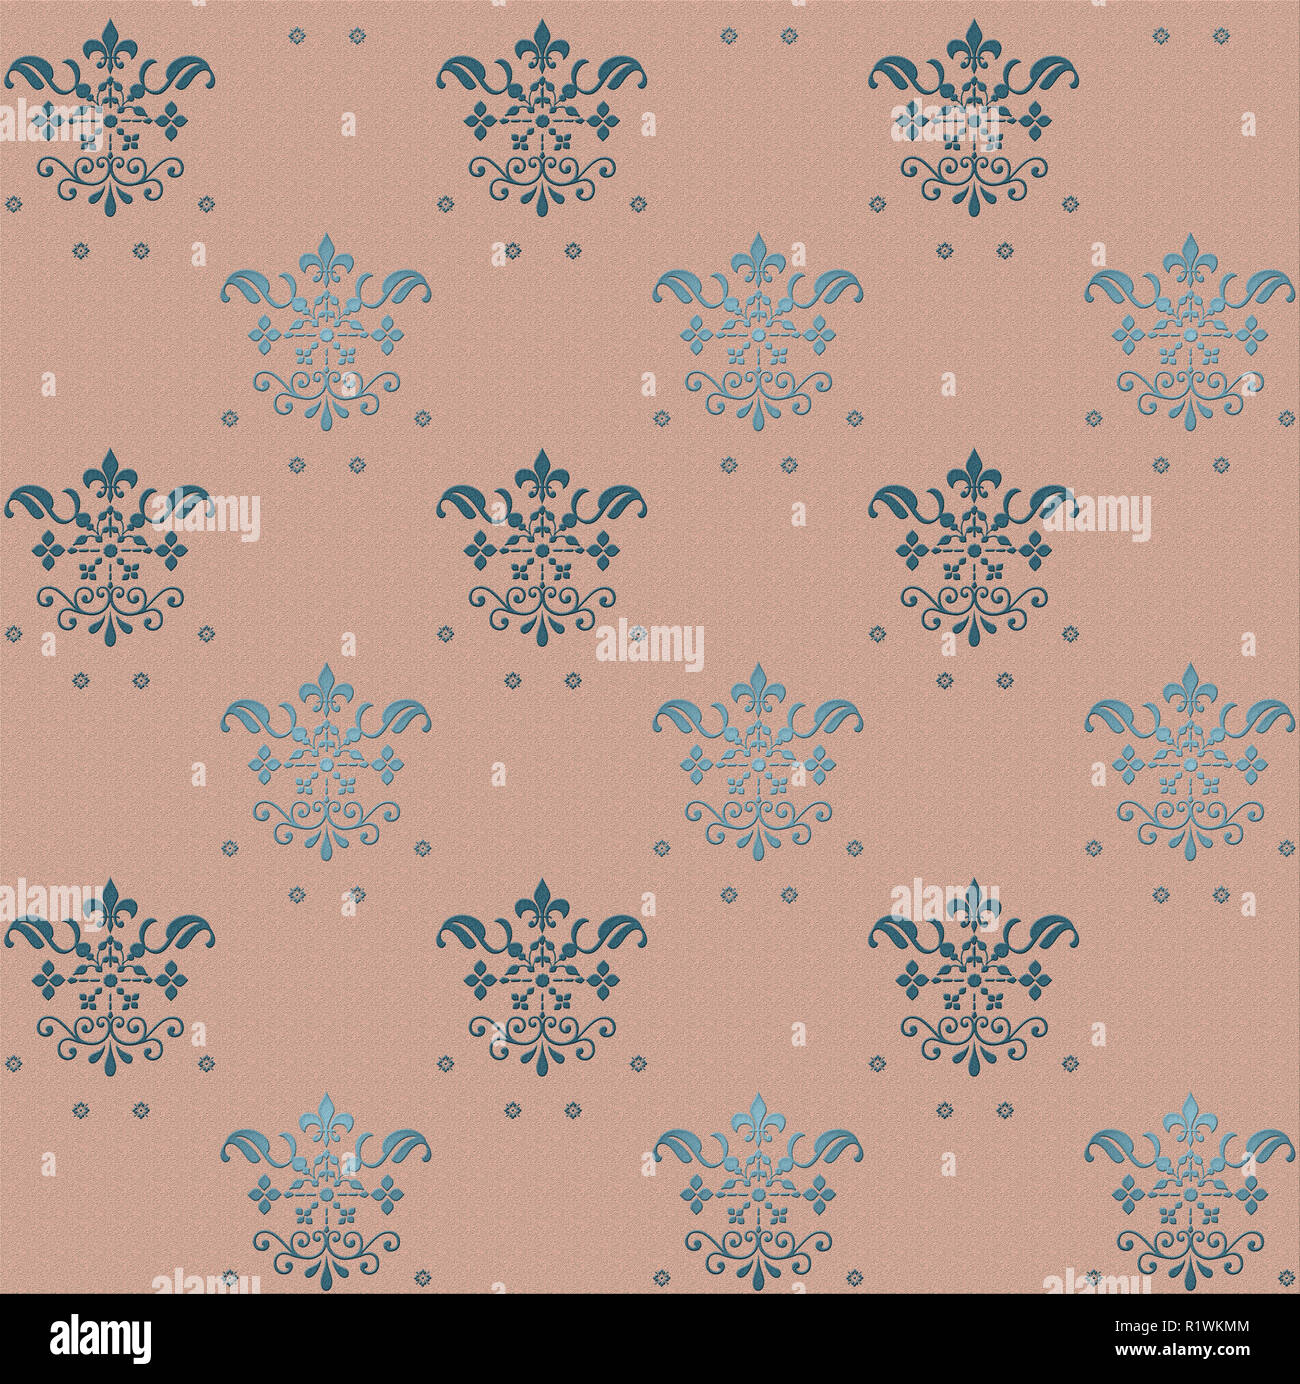 Seamless gothic wallpaper pattern on pink background with blue floral  elements Stock Photo - Alamy